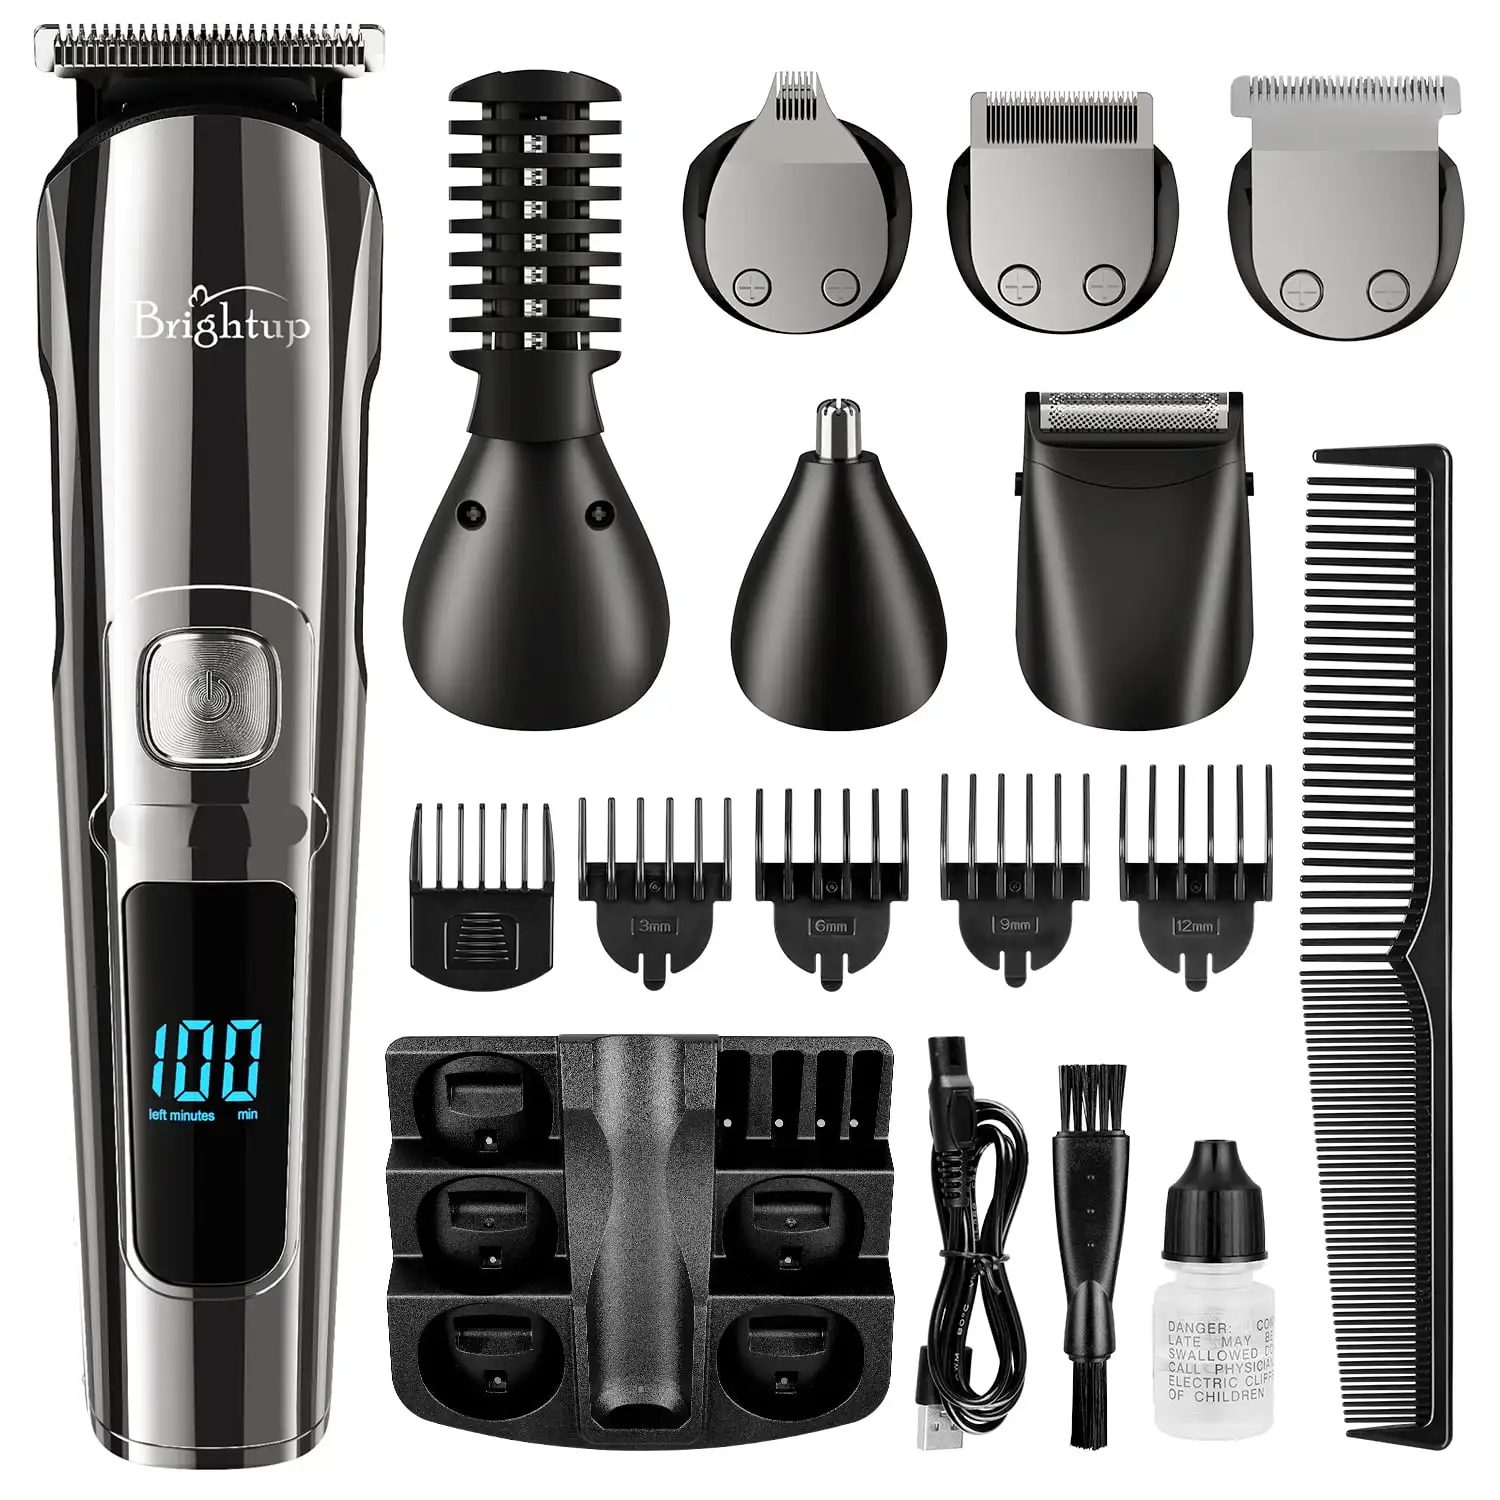 

Beard Trimmer for Men, Cordless Hair Clippers Hair Trimmer, IPX7 Waterproof Mustache Body Nose Ear Facial Cutting Shaver, All i